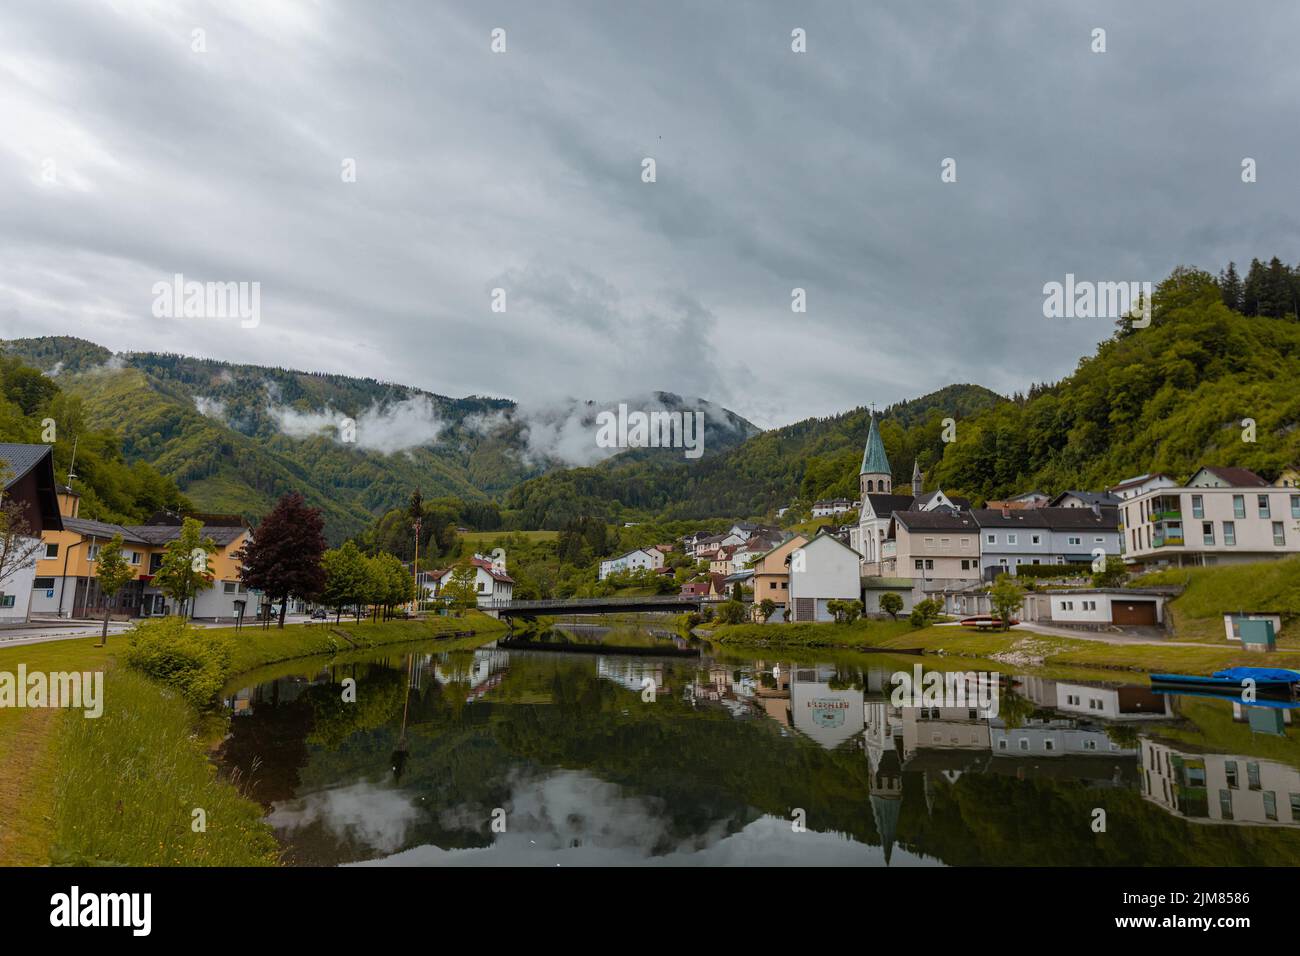 Panorama of the city of Reichraming a small town in central austria on a cloudy day. Visible reflection of the village over the river running through Stock Photo